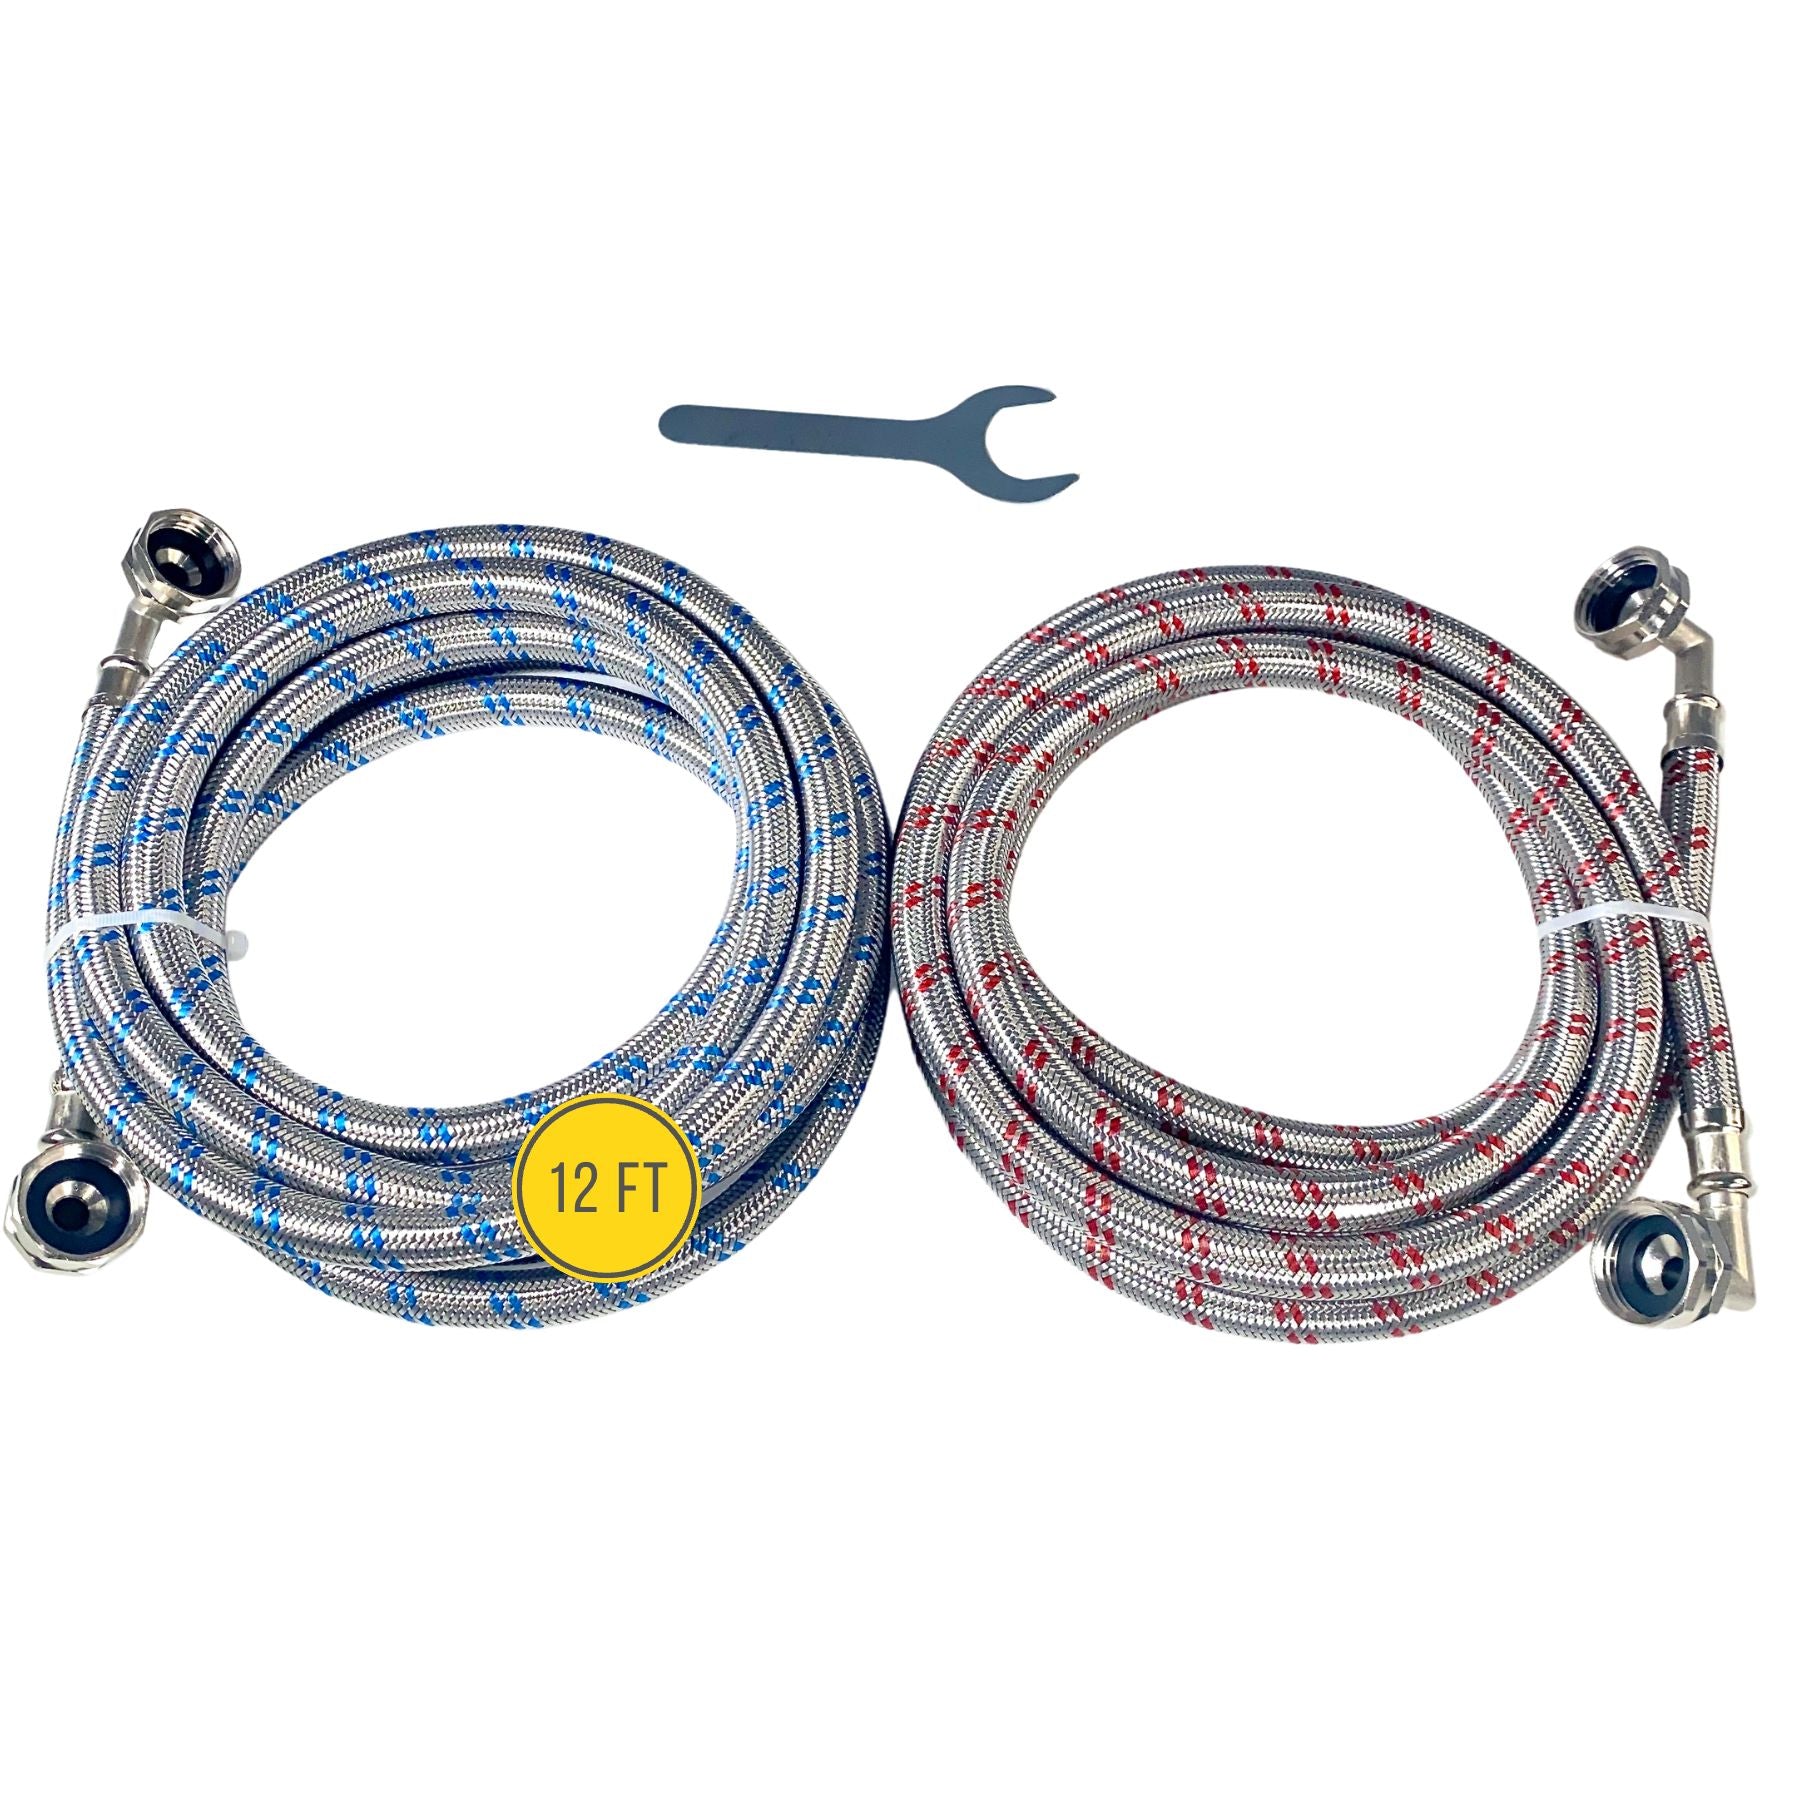 12 Foot Stainless Steel Washing Machine Hoses Double 90 Degree Elbows